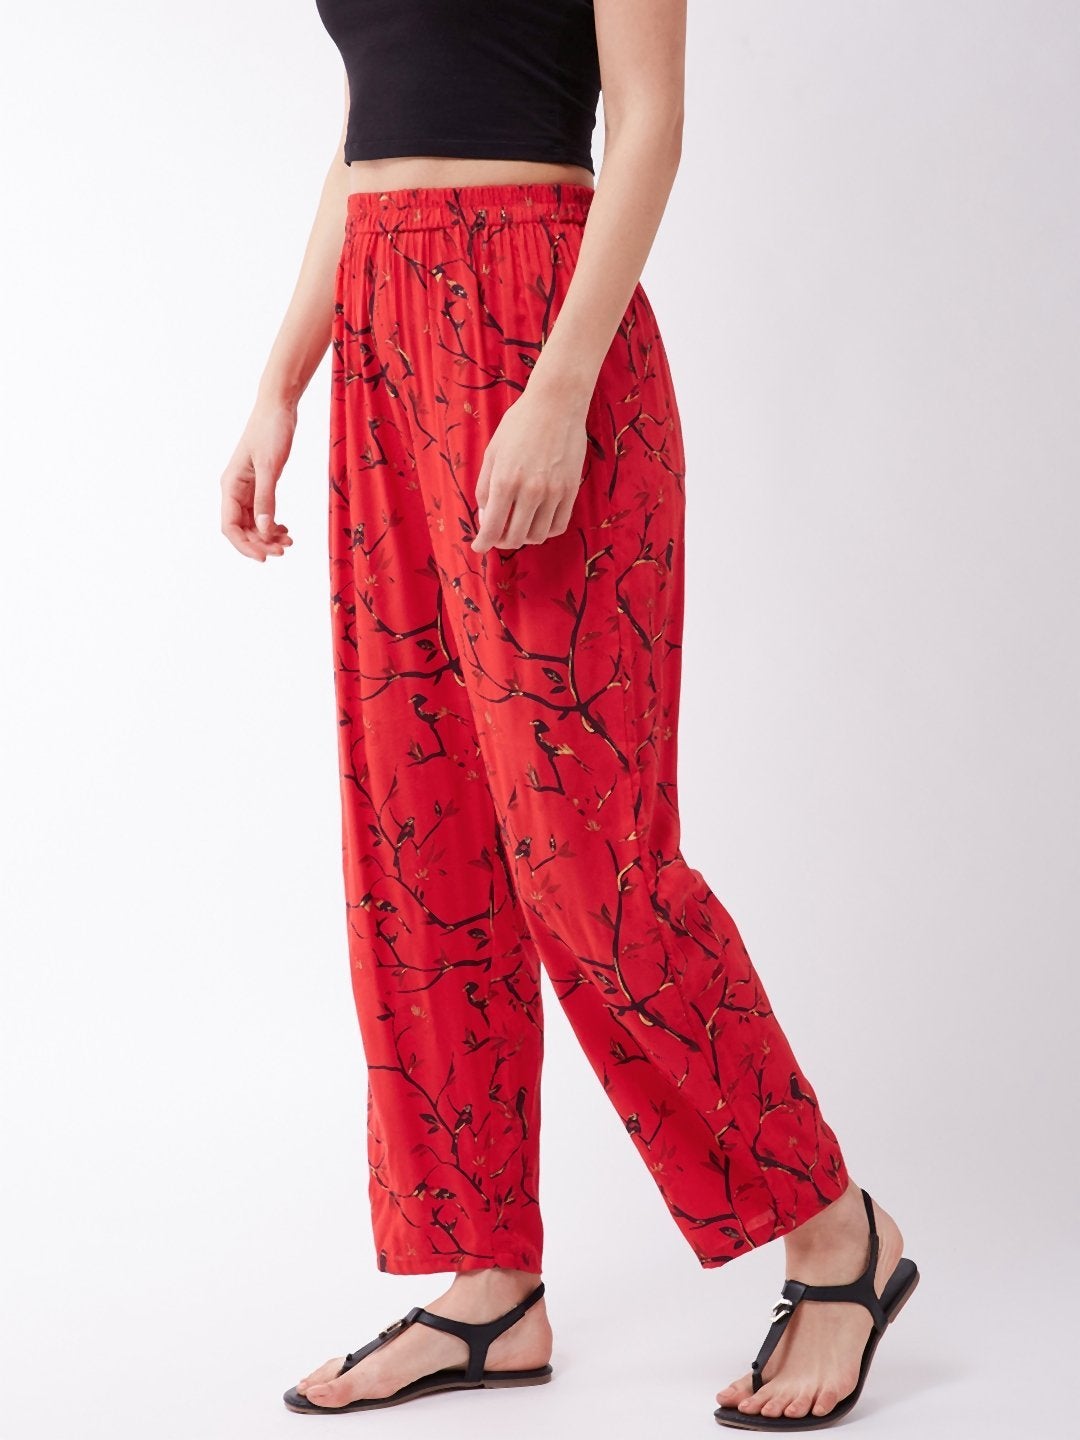 Women's Red &Gold Pant - InWeave